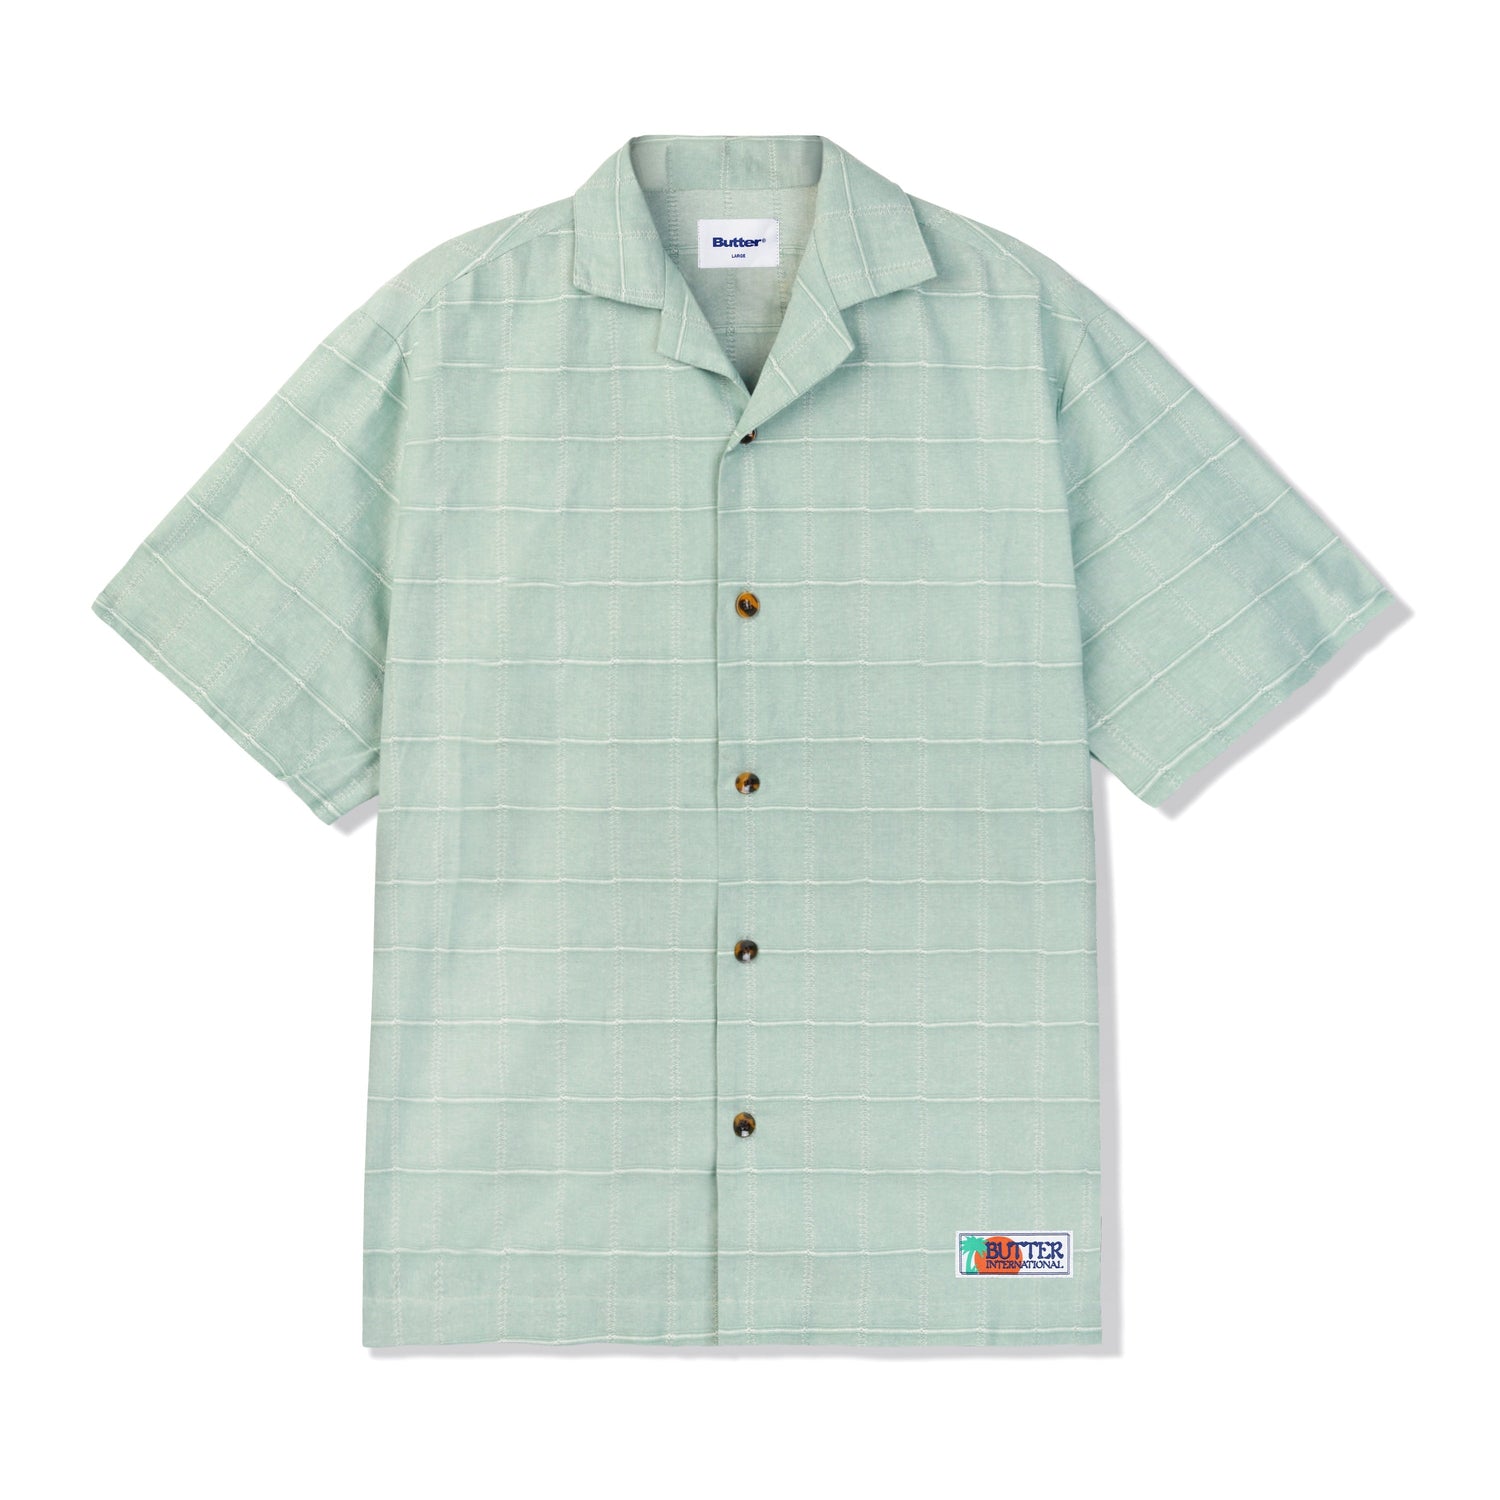 Pacific S/S Shirt, Pale Green